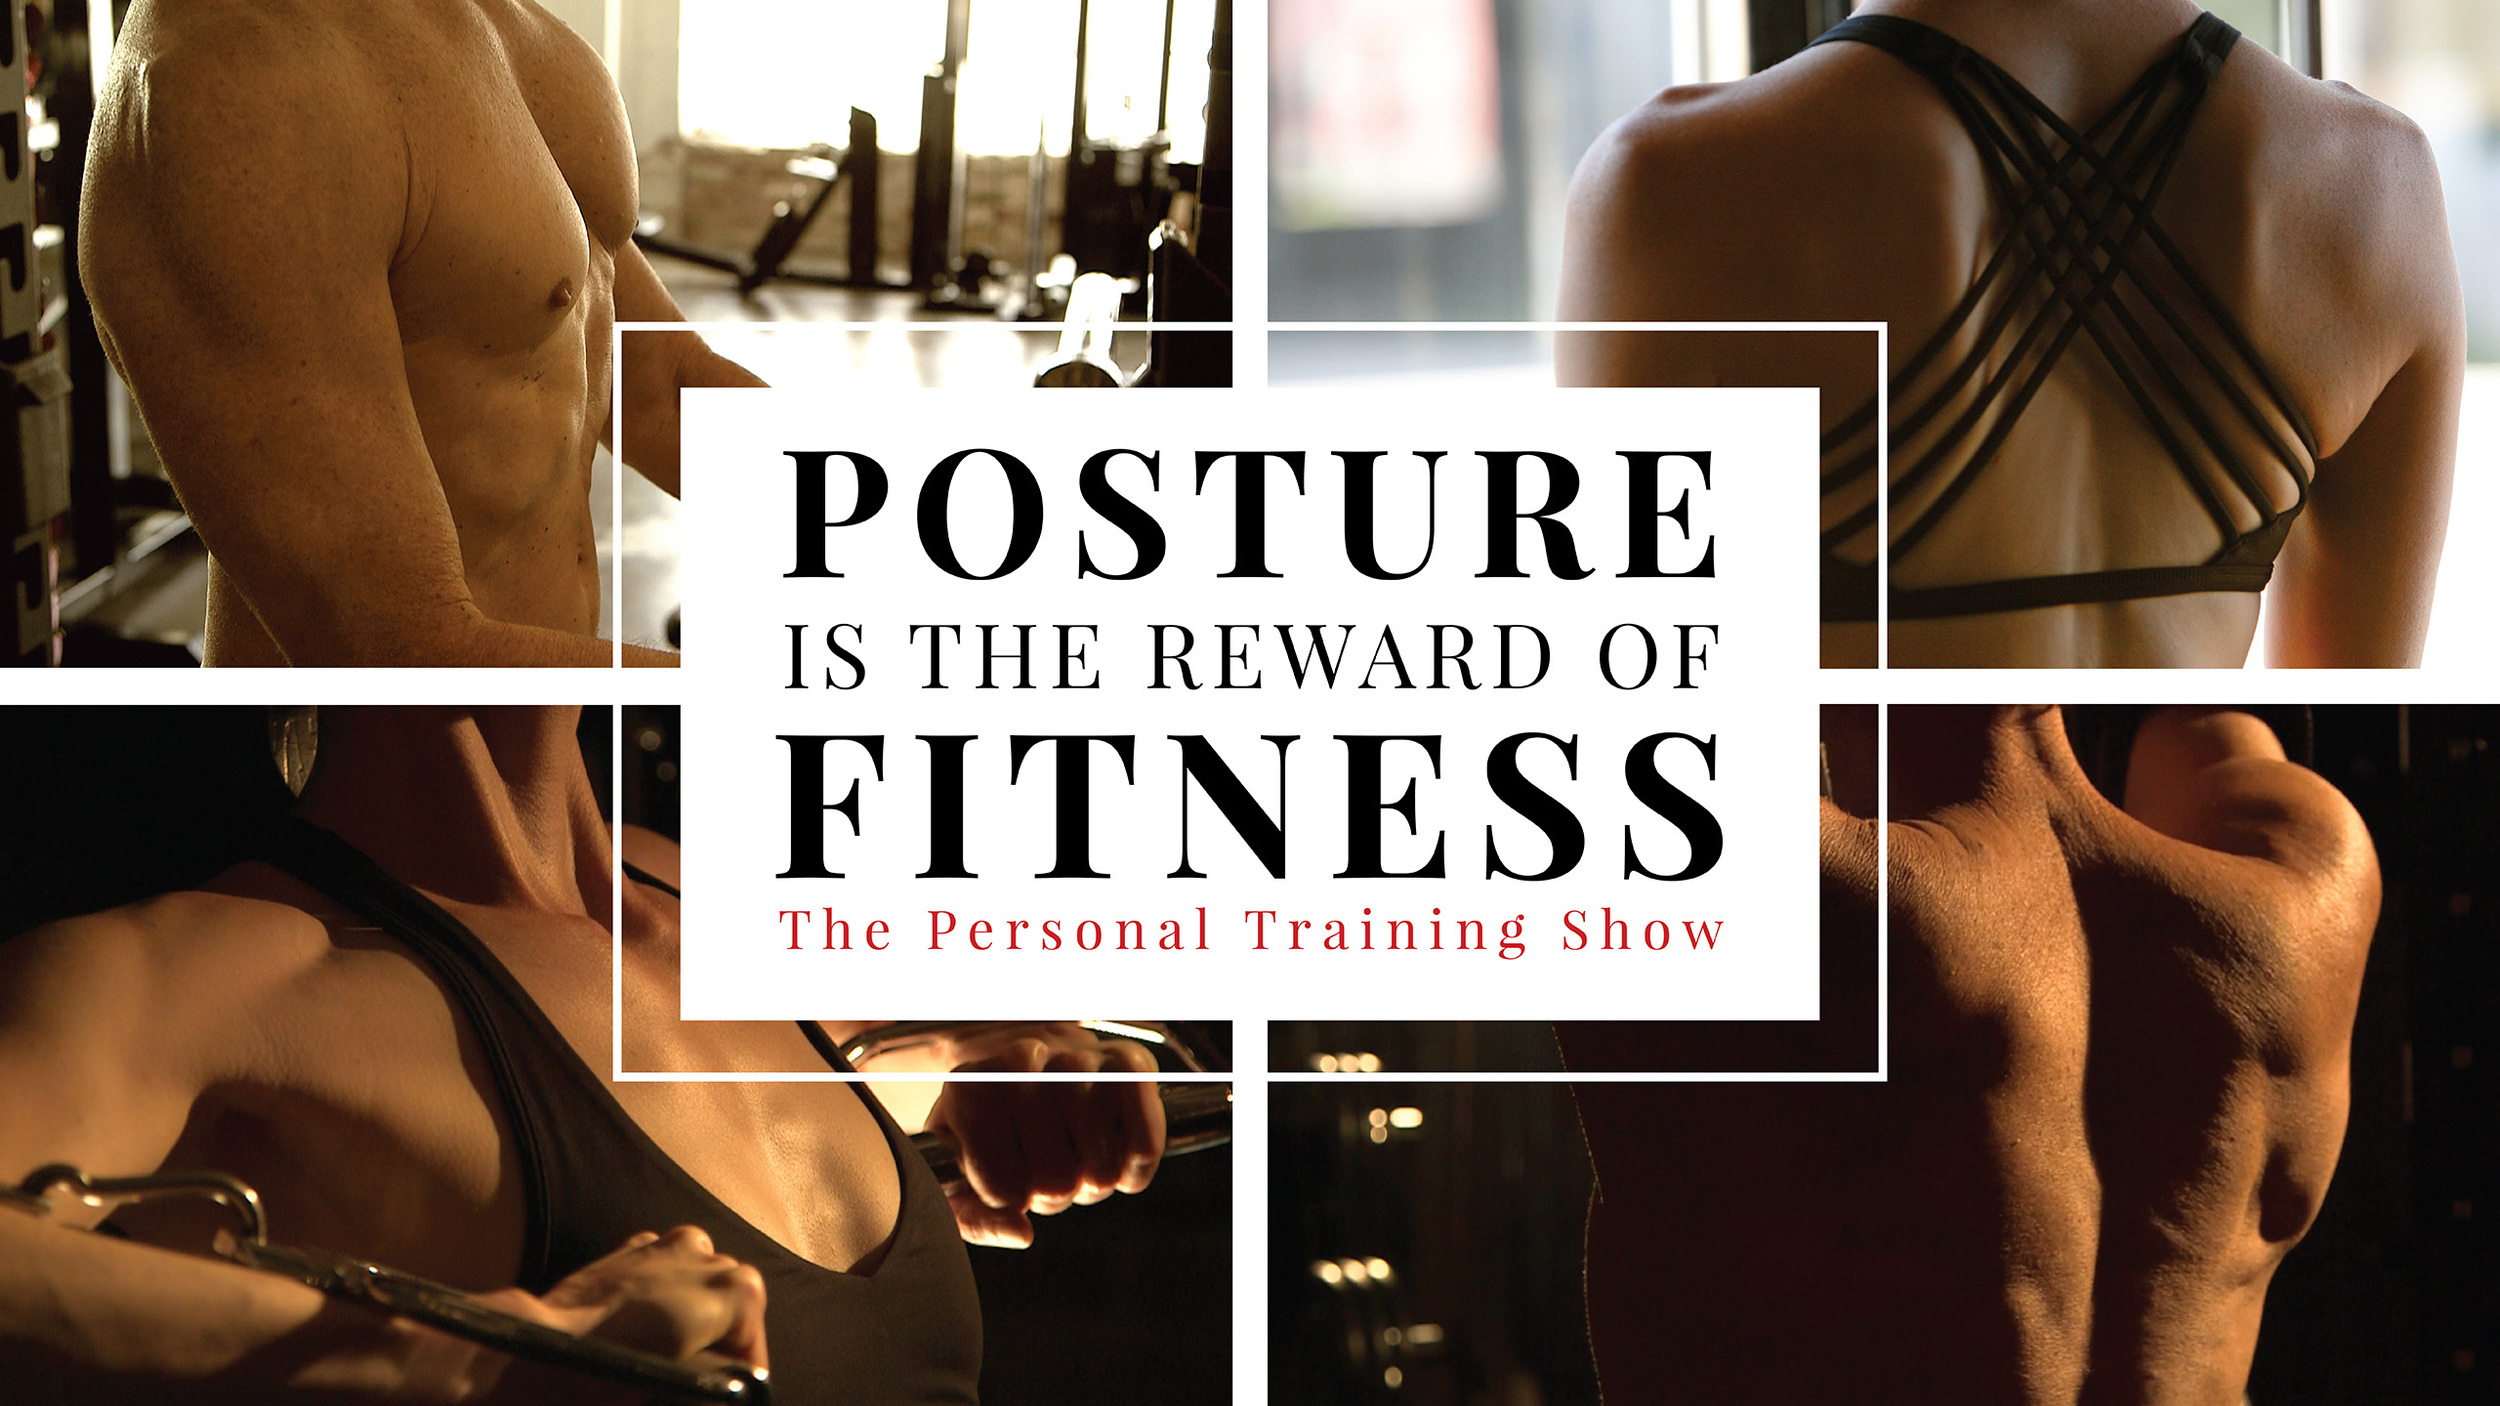 Posture Is The Reward Of Fitness